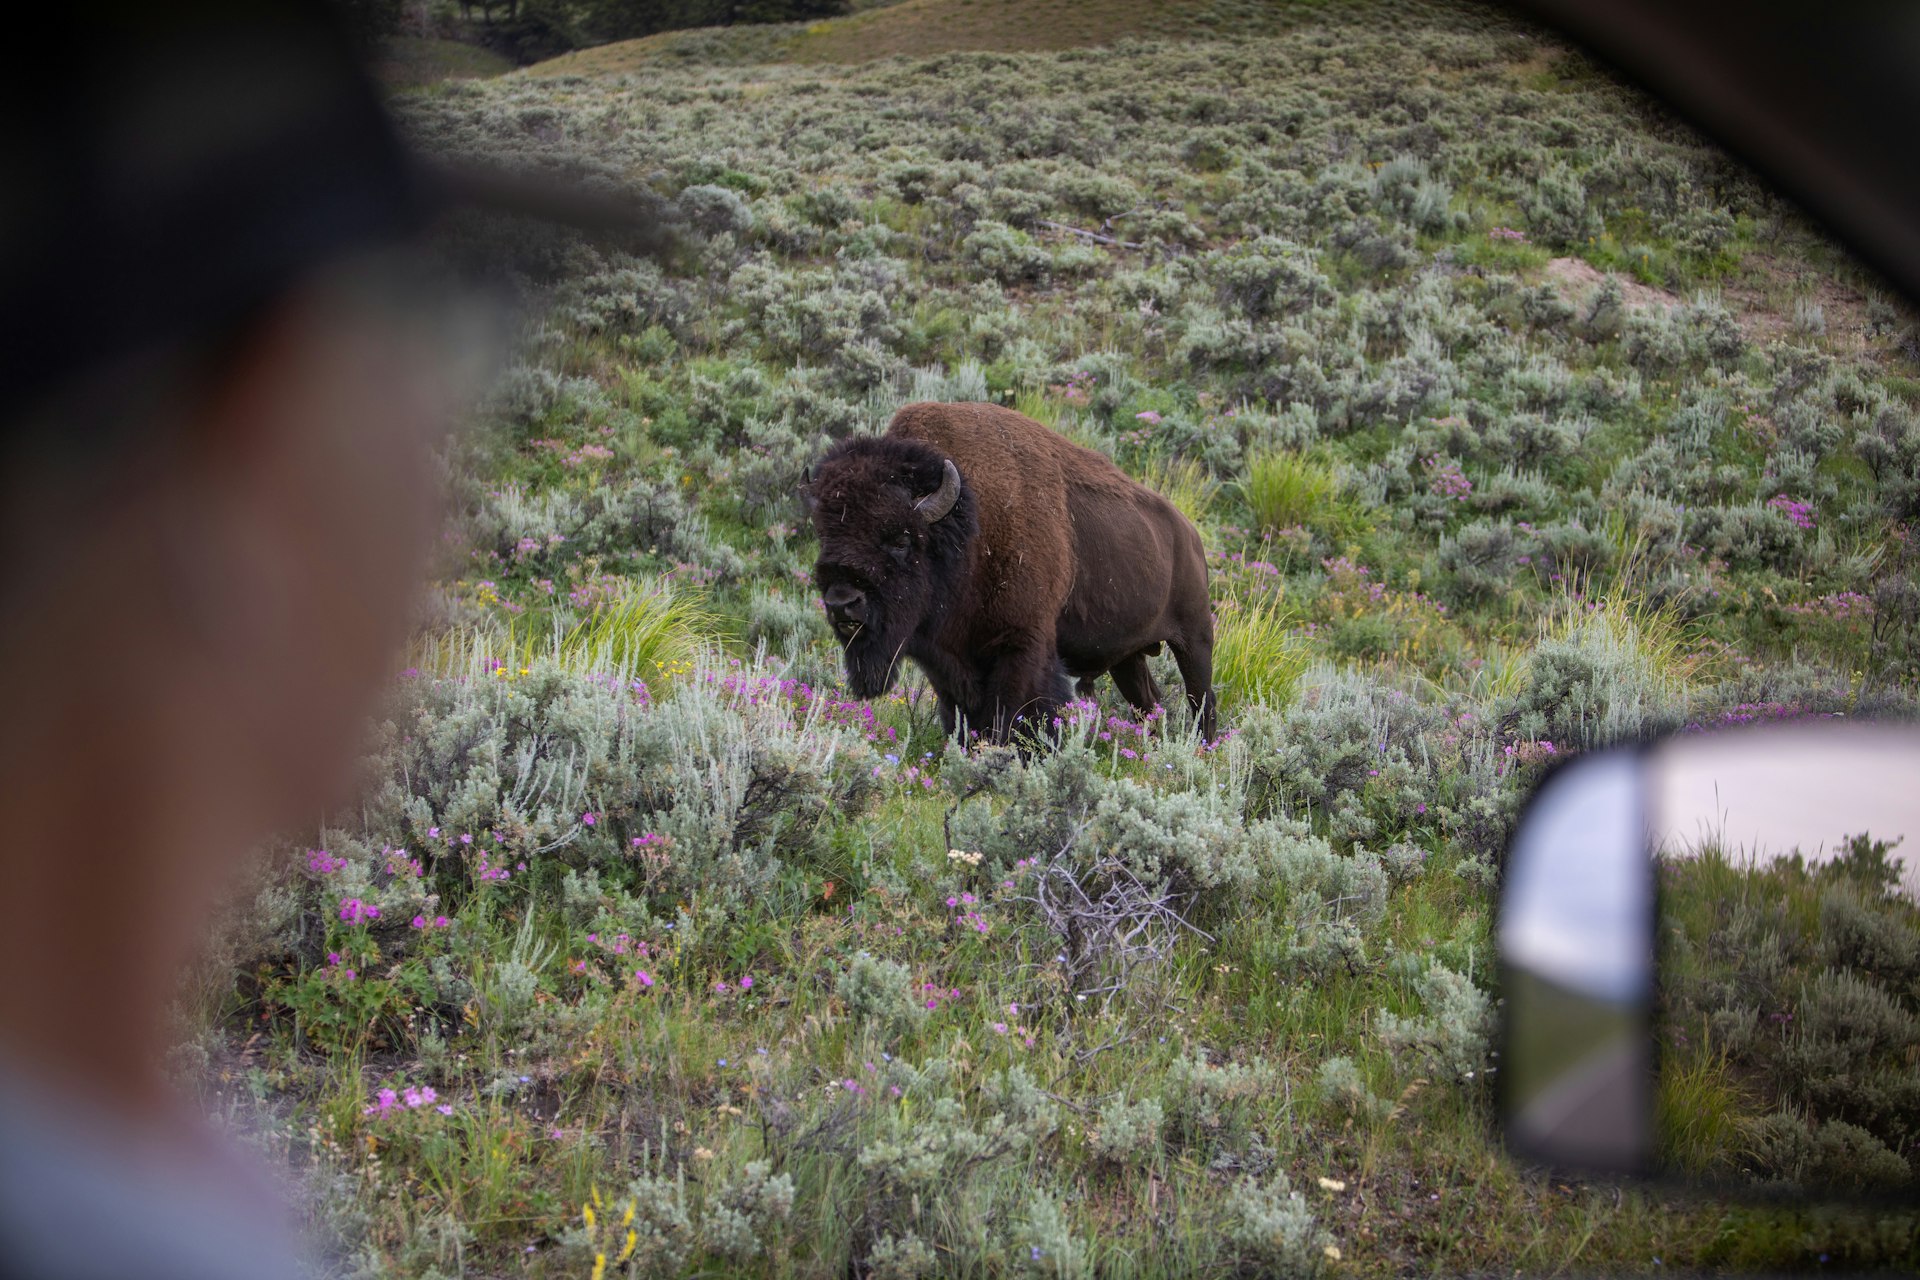 Lamar Valley, a bison through a car window in Yellowstone National Park